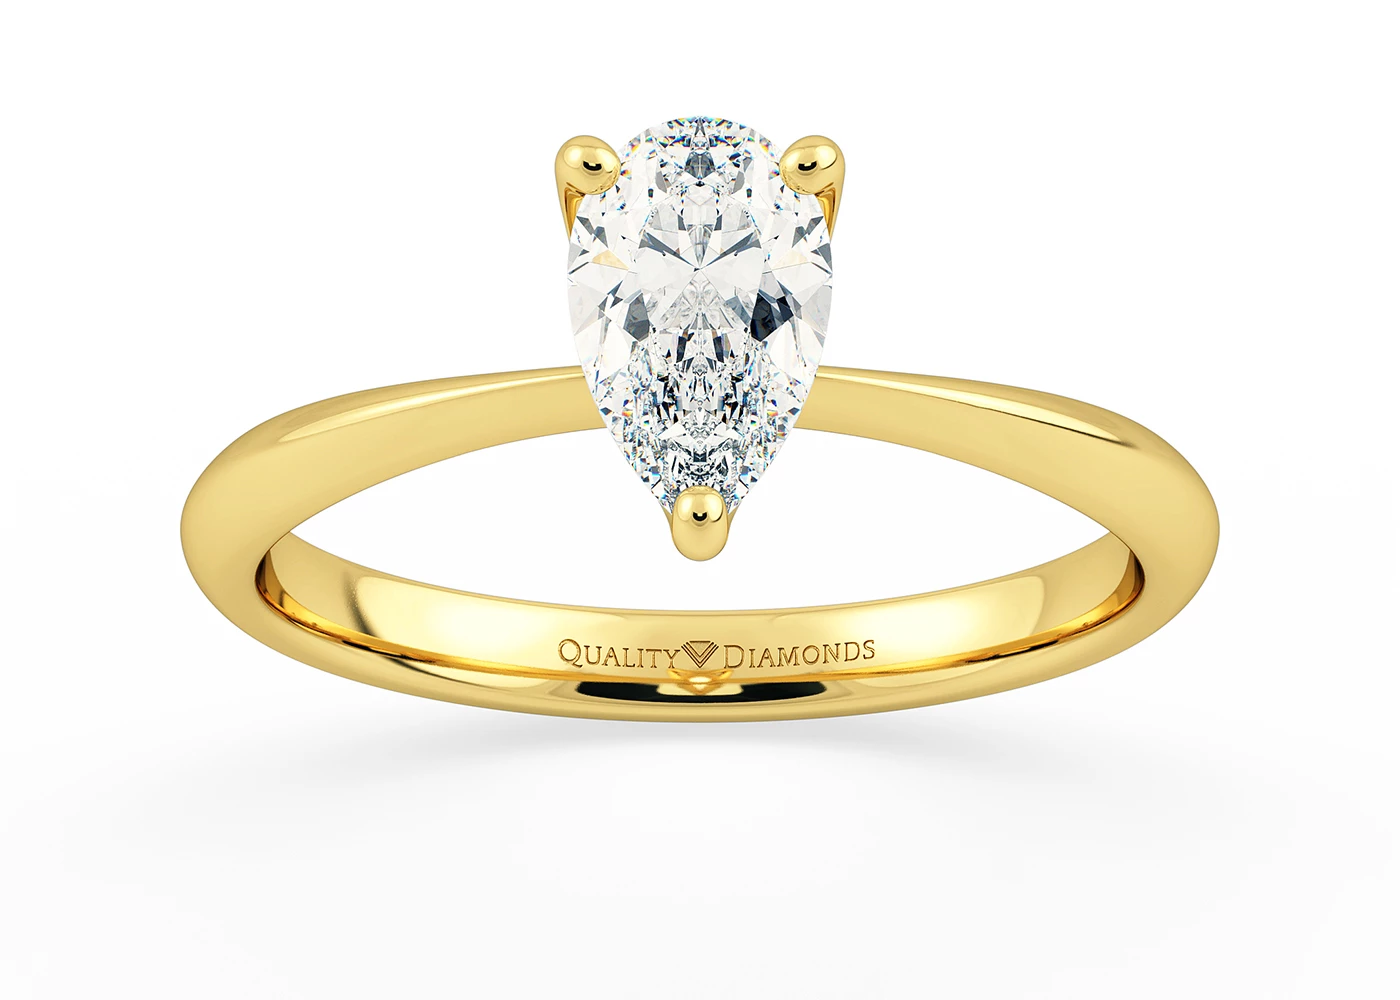 Pear Amorette Diamond Ring in 9K Yellow Gold